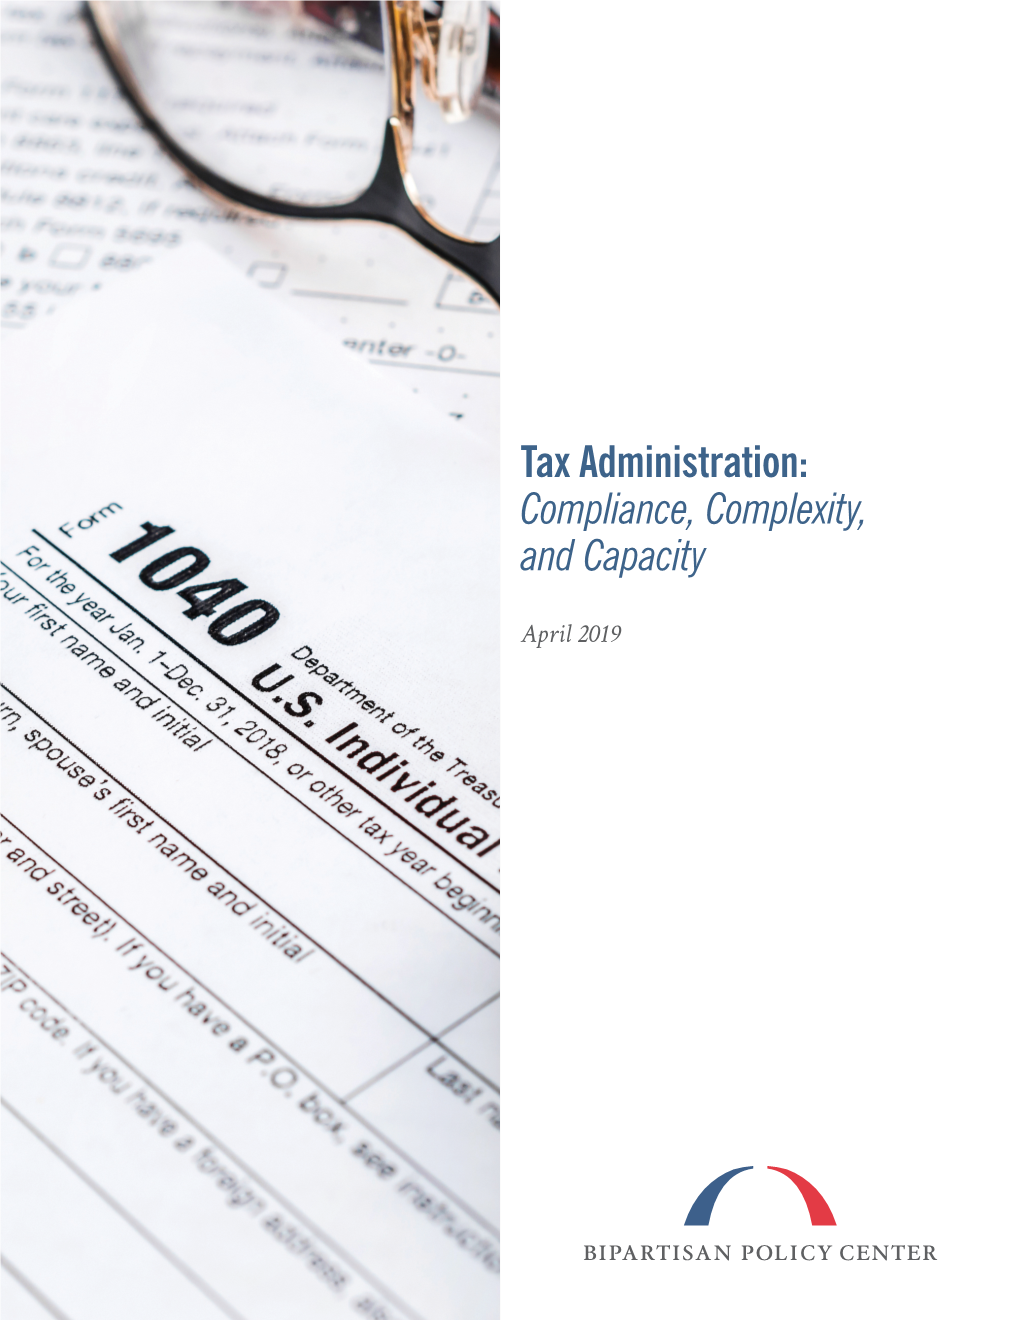 Tax Administration: Compliance, Complexity, and Capacity